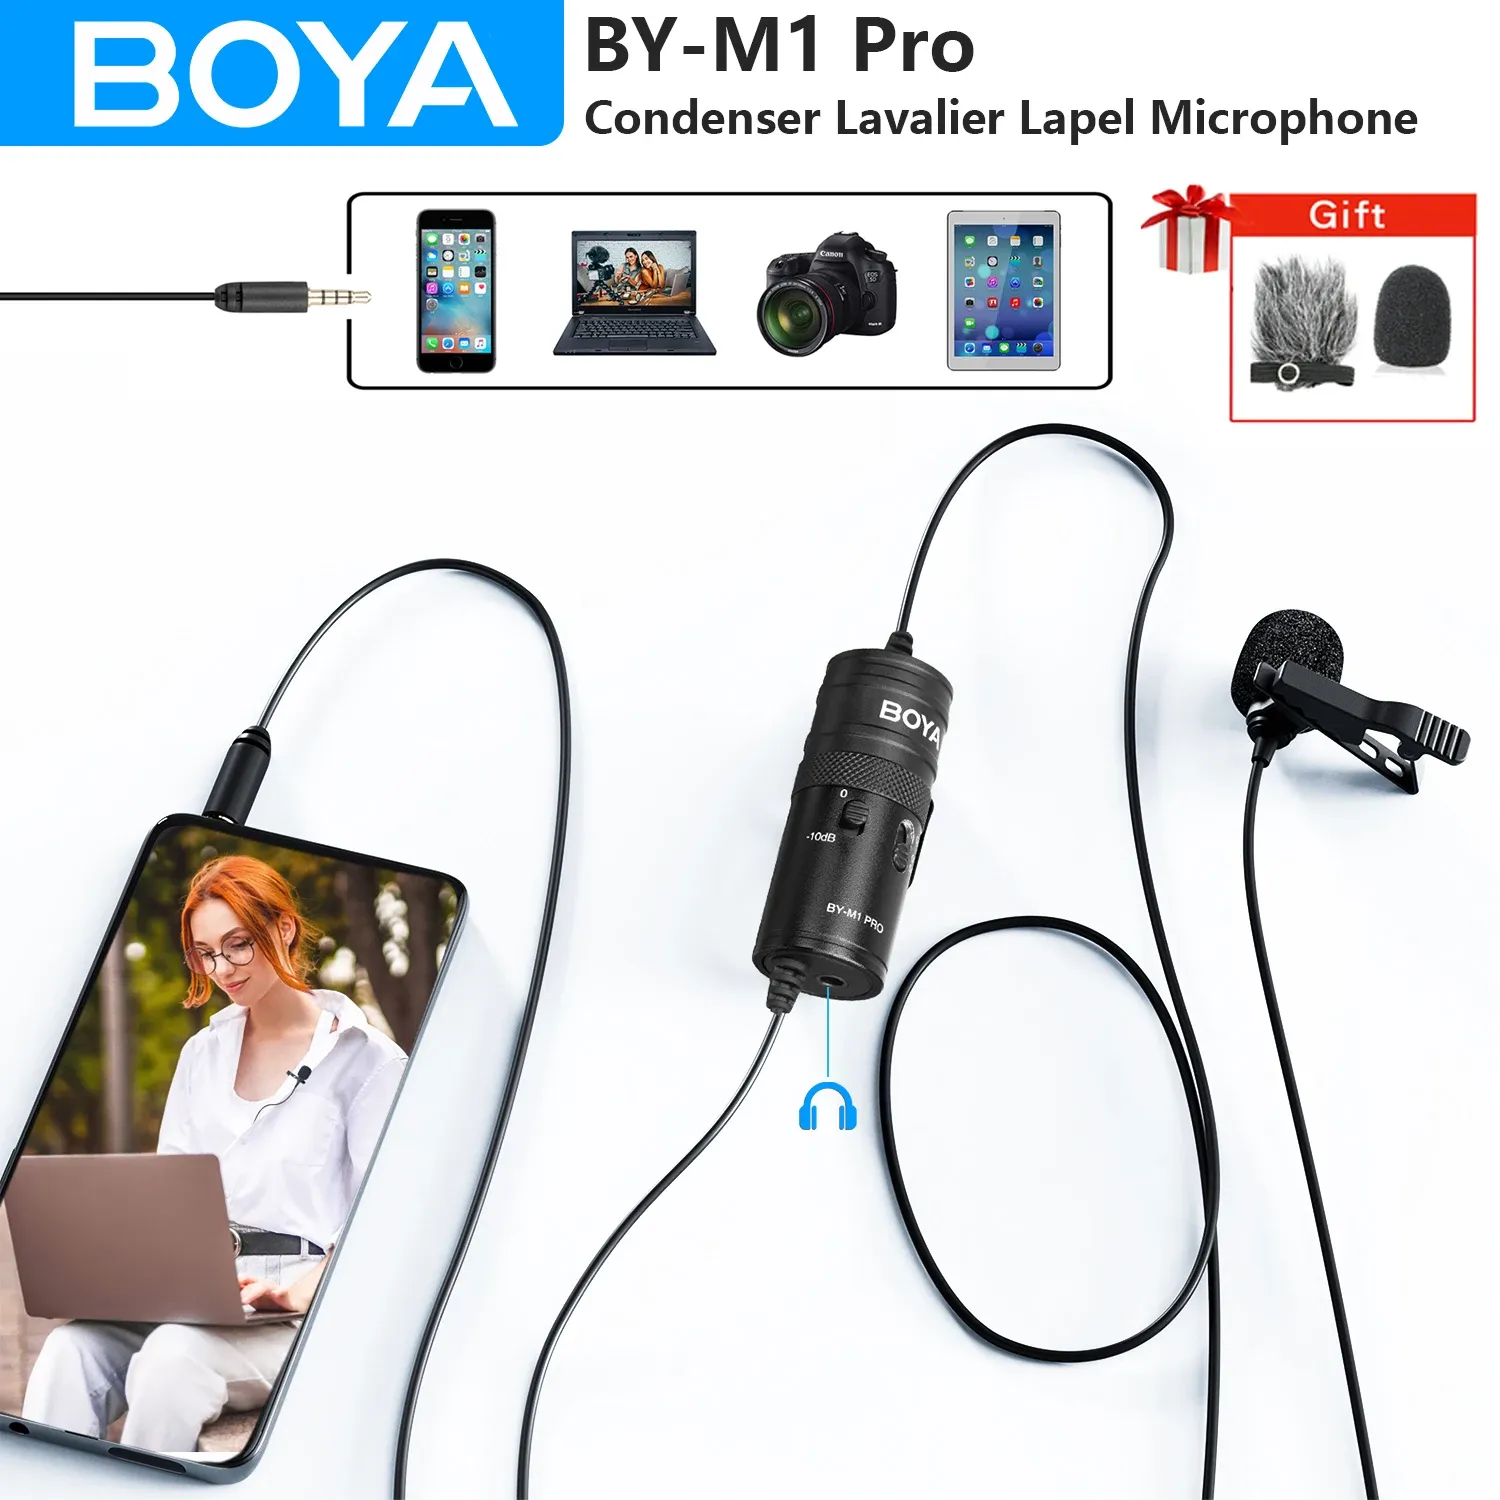 Tripods Boya BYM1 Pro Lavalier Lapel Microphone for iPhone Android DSLR Cameras PC PC Computer Vlog Streaming YouTube Recording Mic